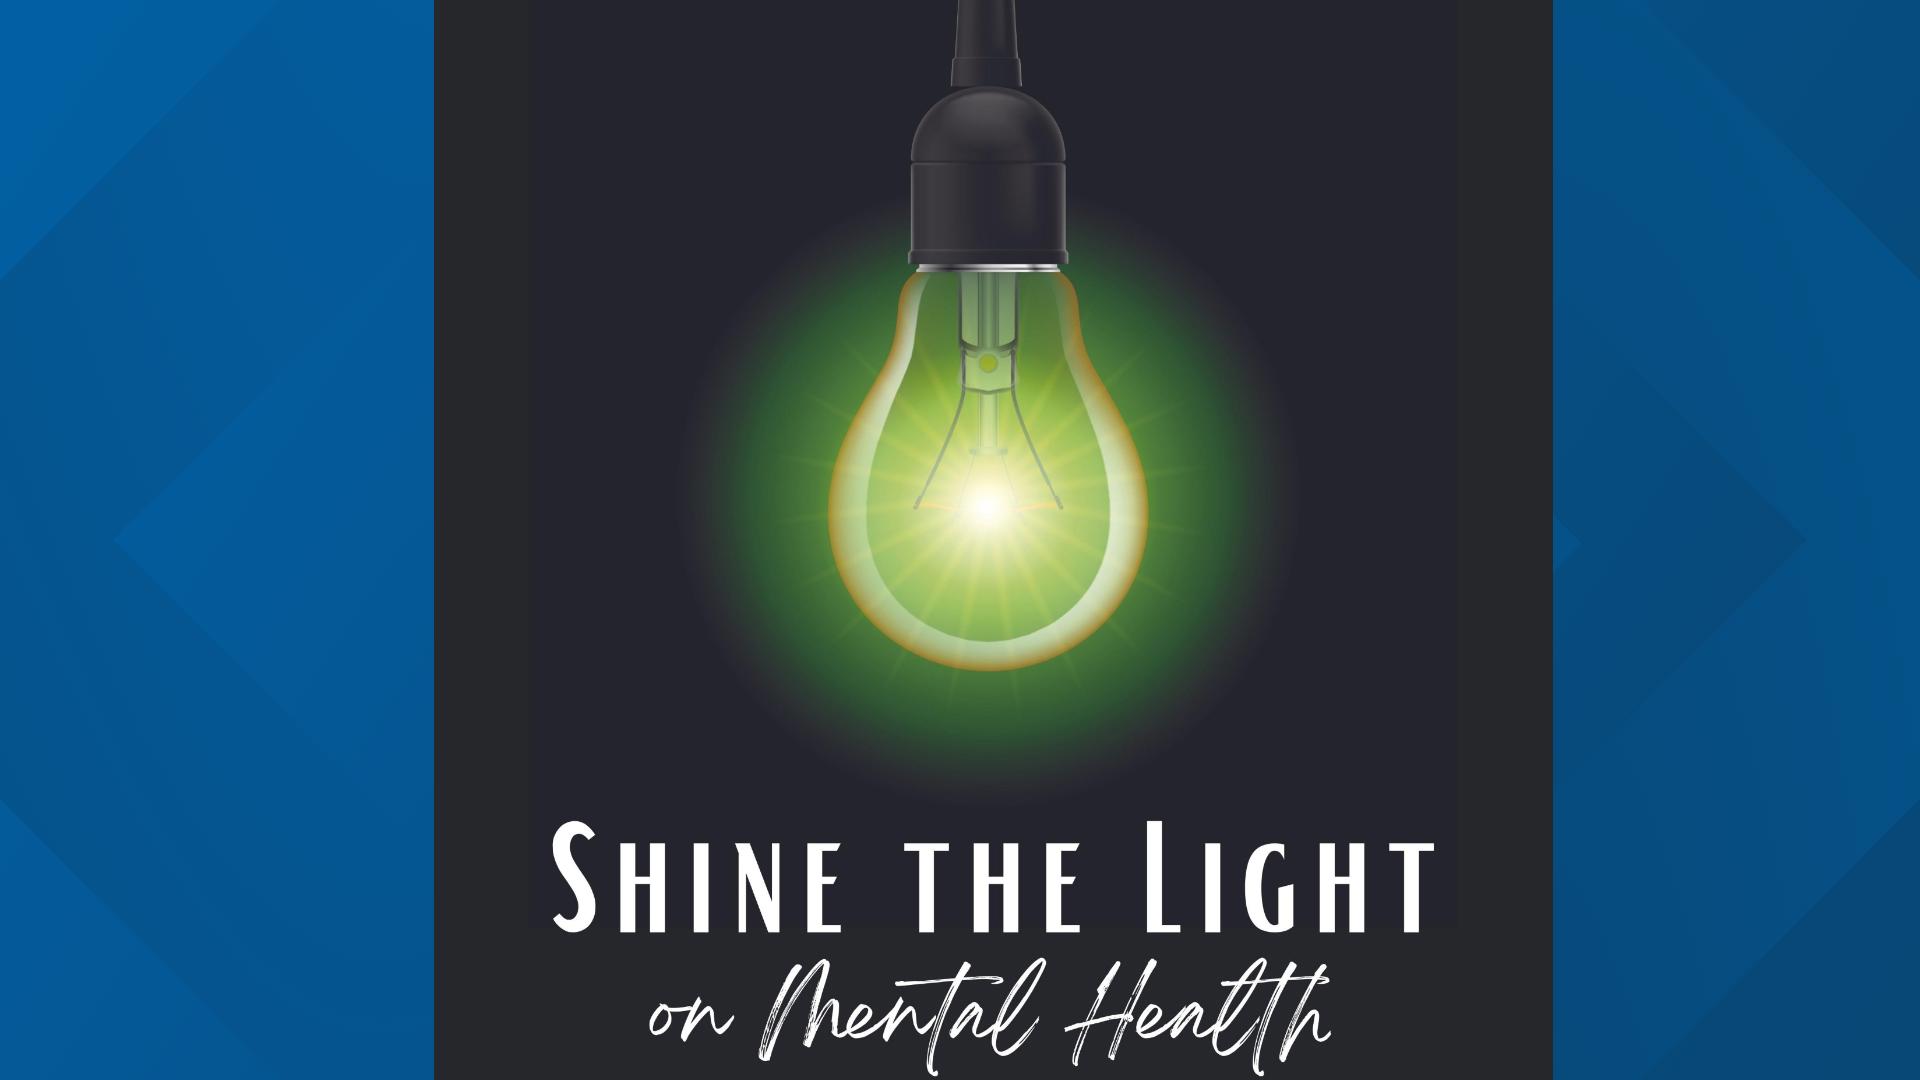 Mental Health America of Lancaster County is looking to get the entire community involved in May's Mental Health Awareness Month, through just a light bulb